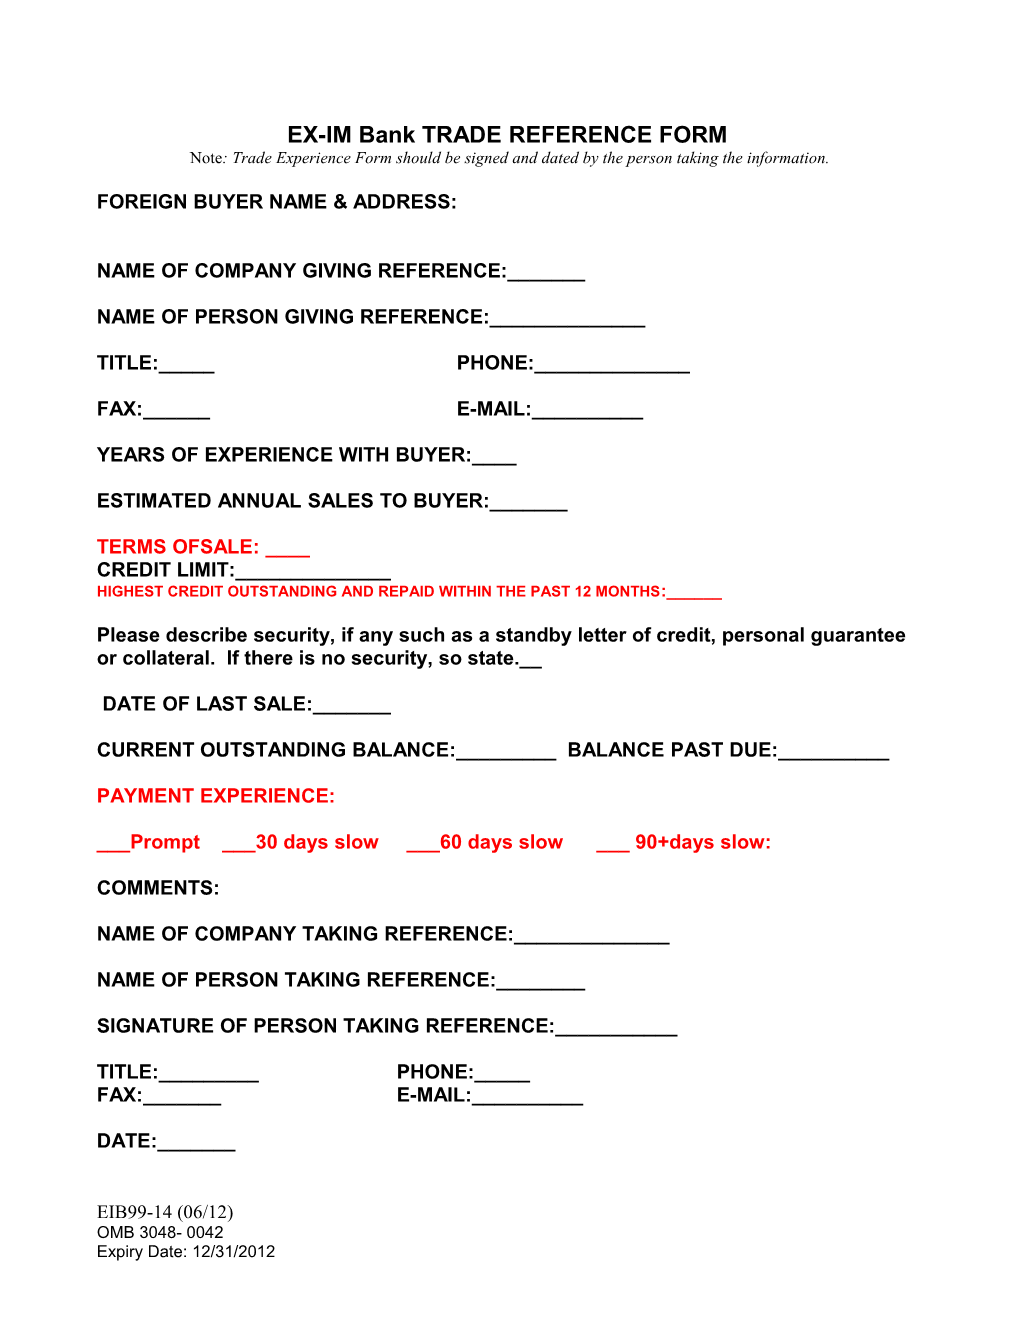 EX-IM Bank TRADE REFERENCE FORM